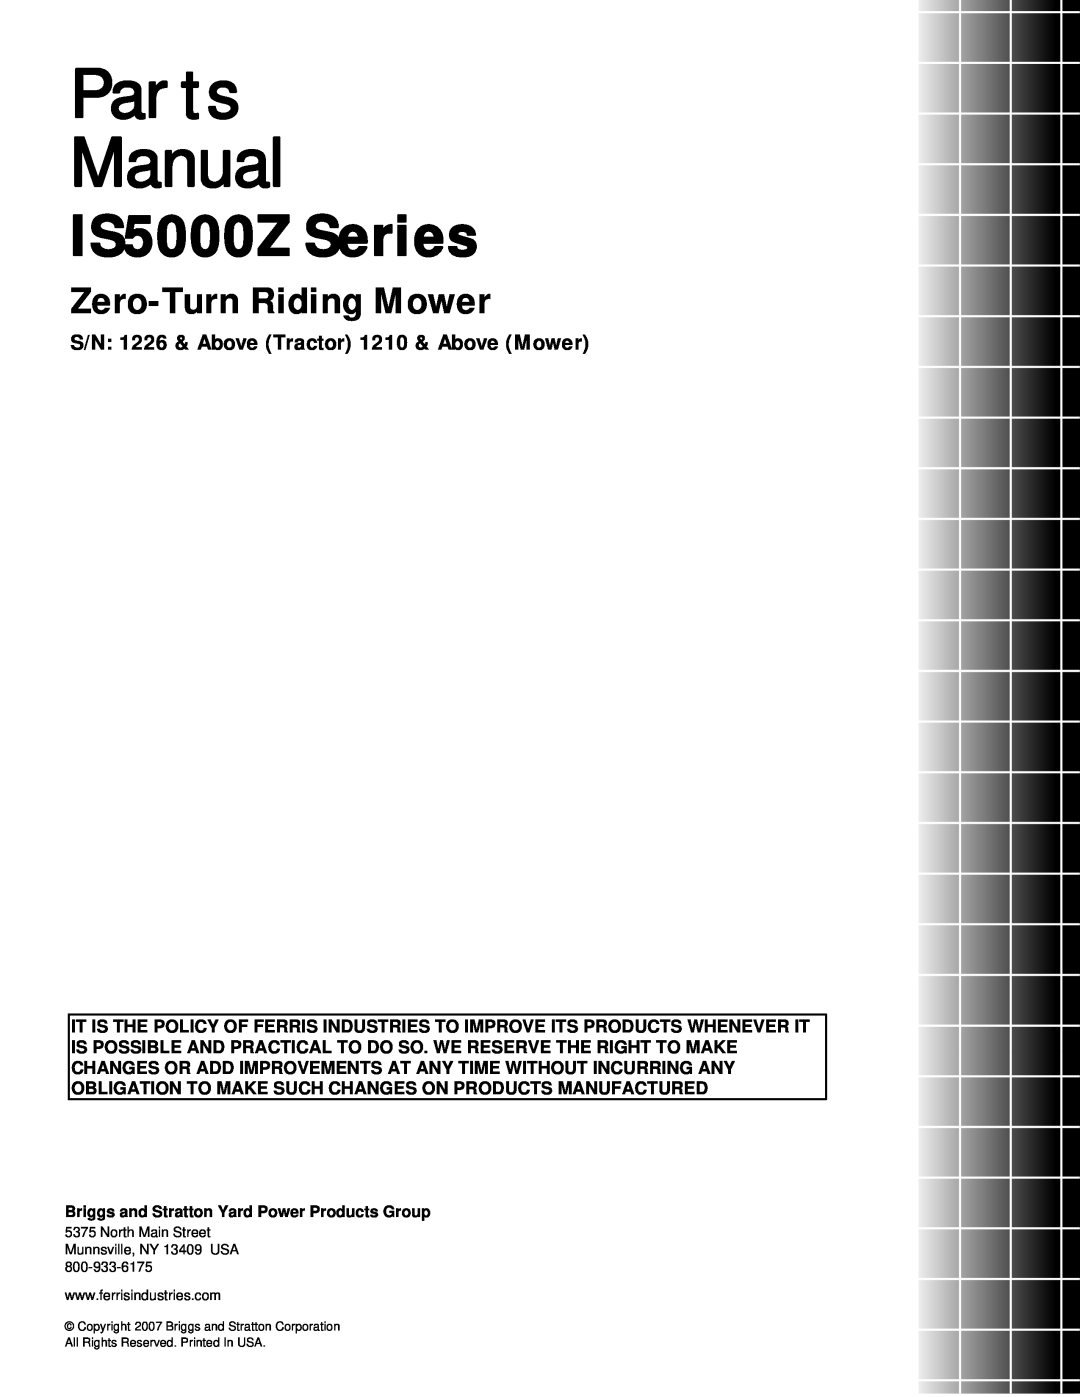 Briggs & Stratton 5901071 S/N 1226 & Above Tractor 1210 & Above Mower, Parts Manual, IS5000Z Series, Zero-TurnRiding Mower 